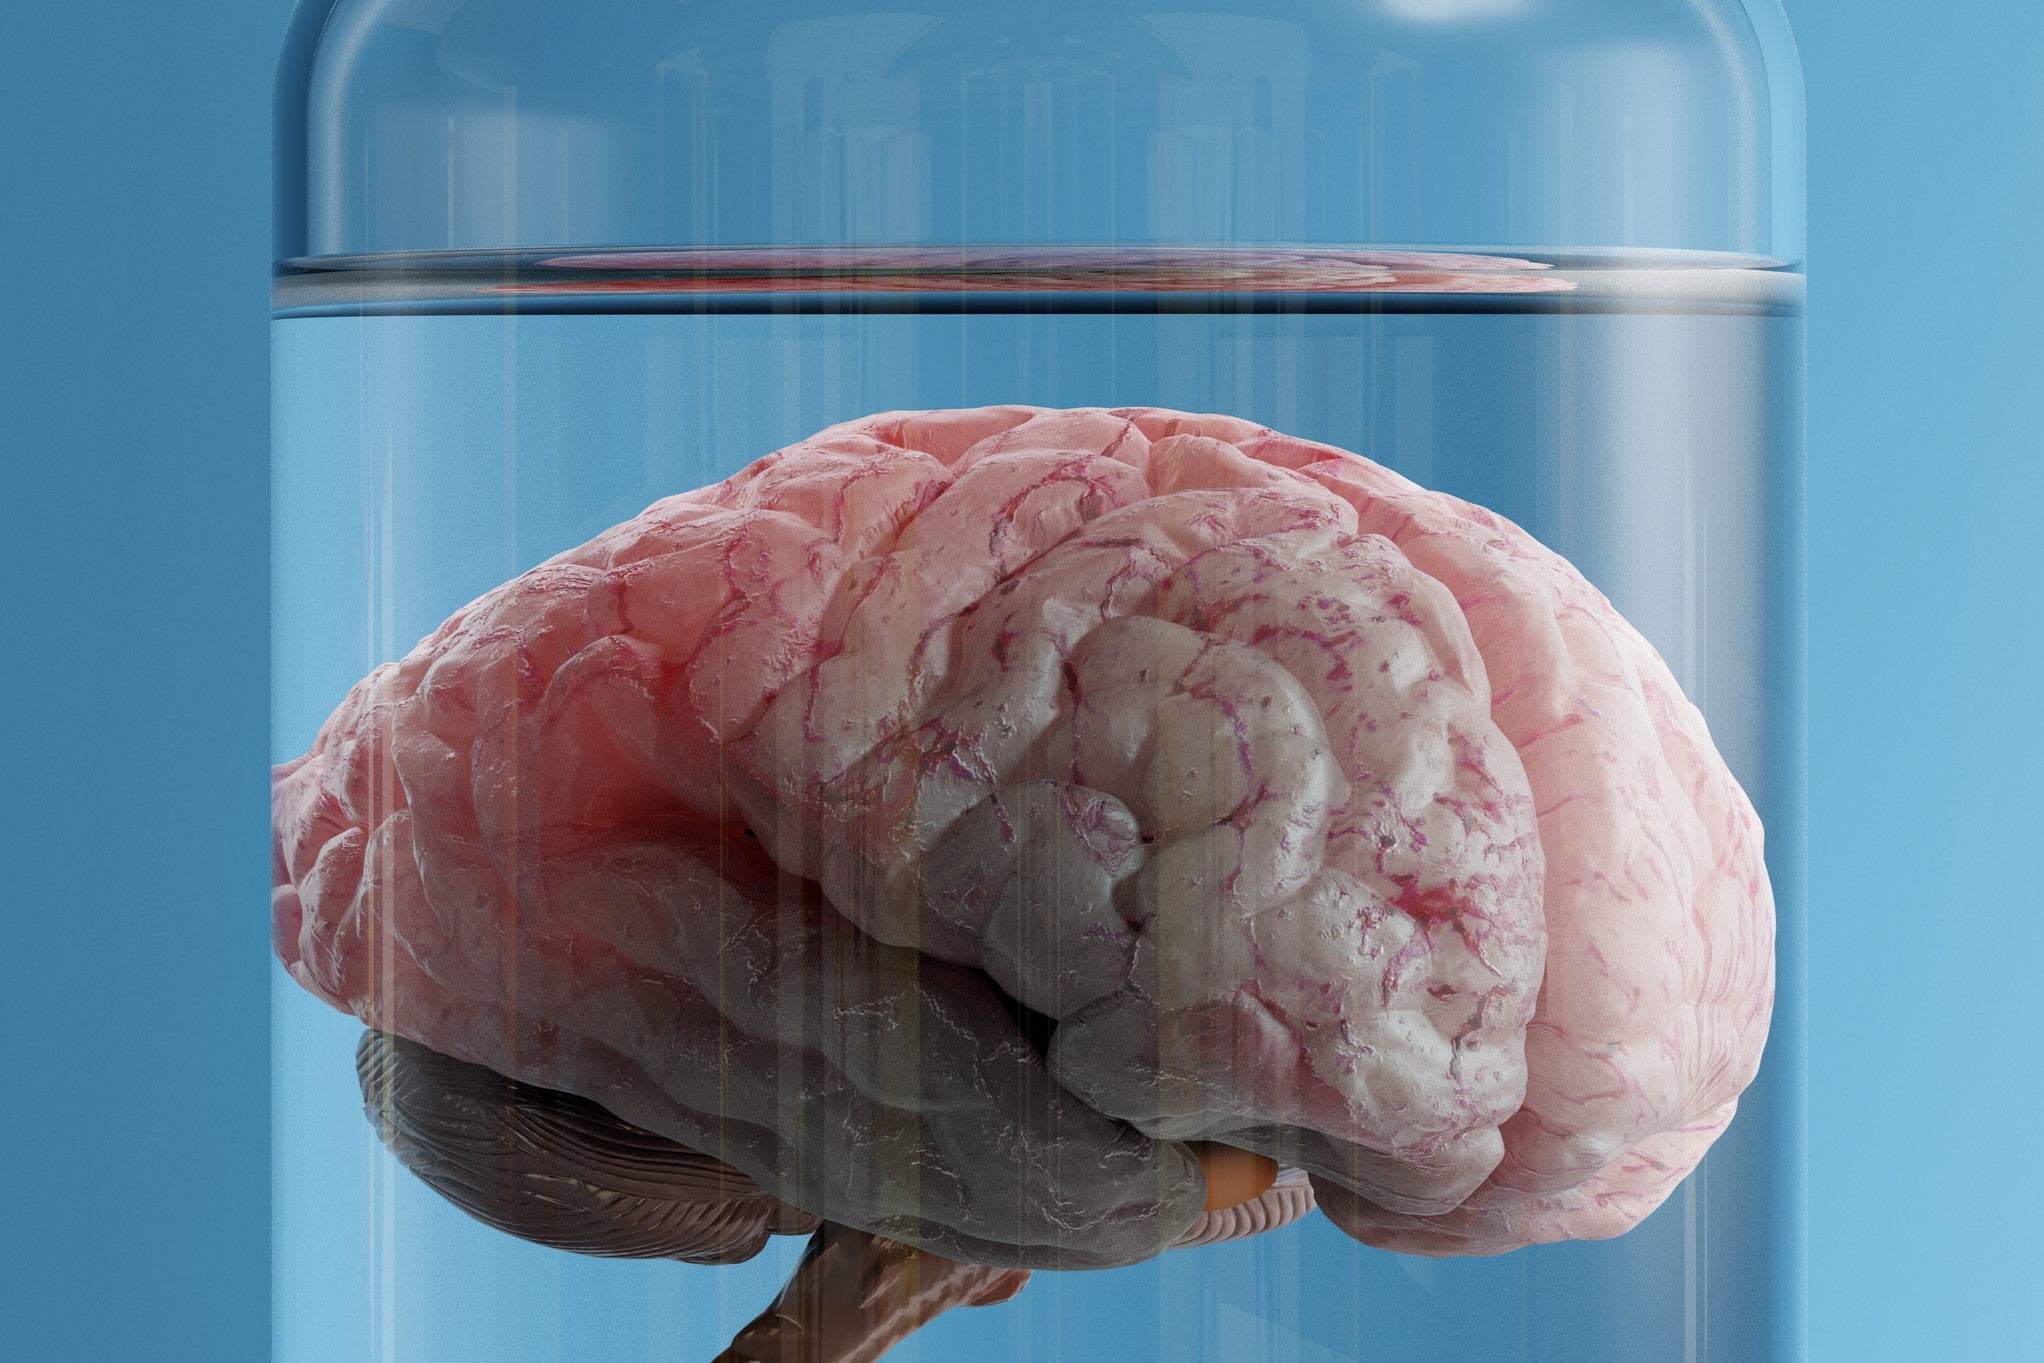 New invention uses algorithm to maintain the necessary blood flow, pressure and oxygenation to allow a severed brain to keep functioning